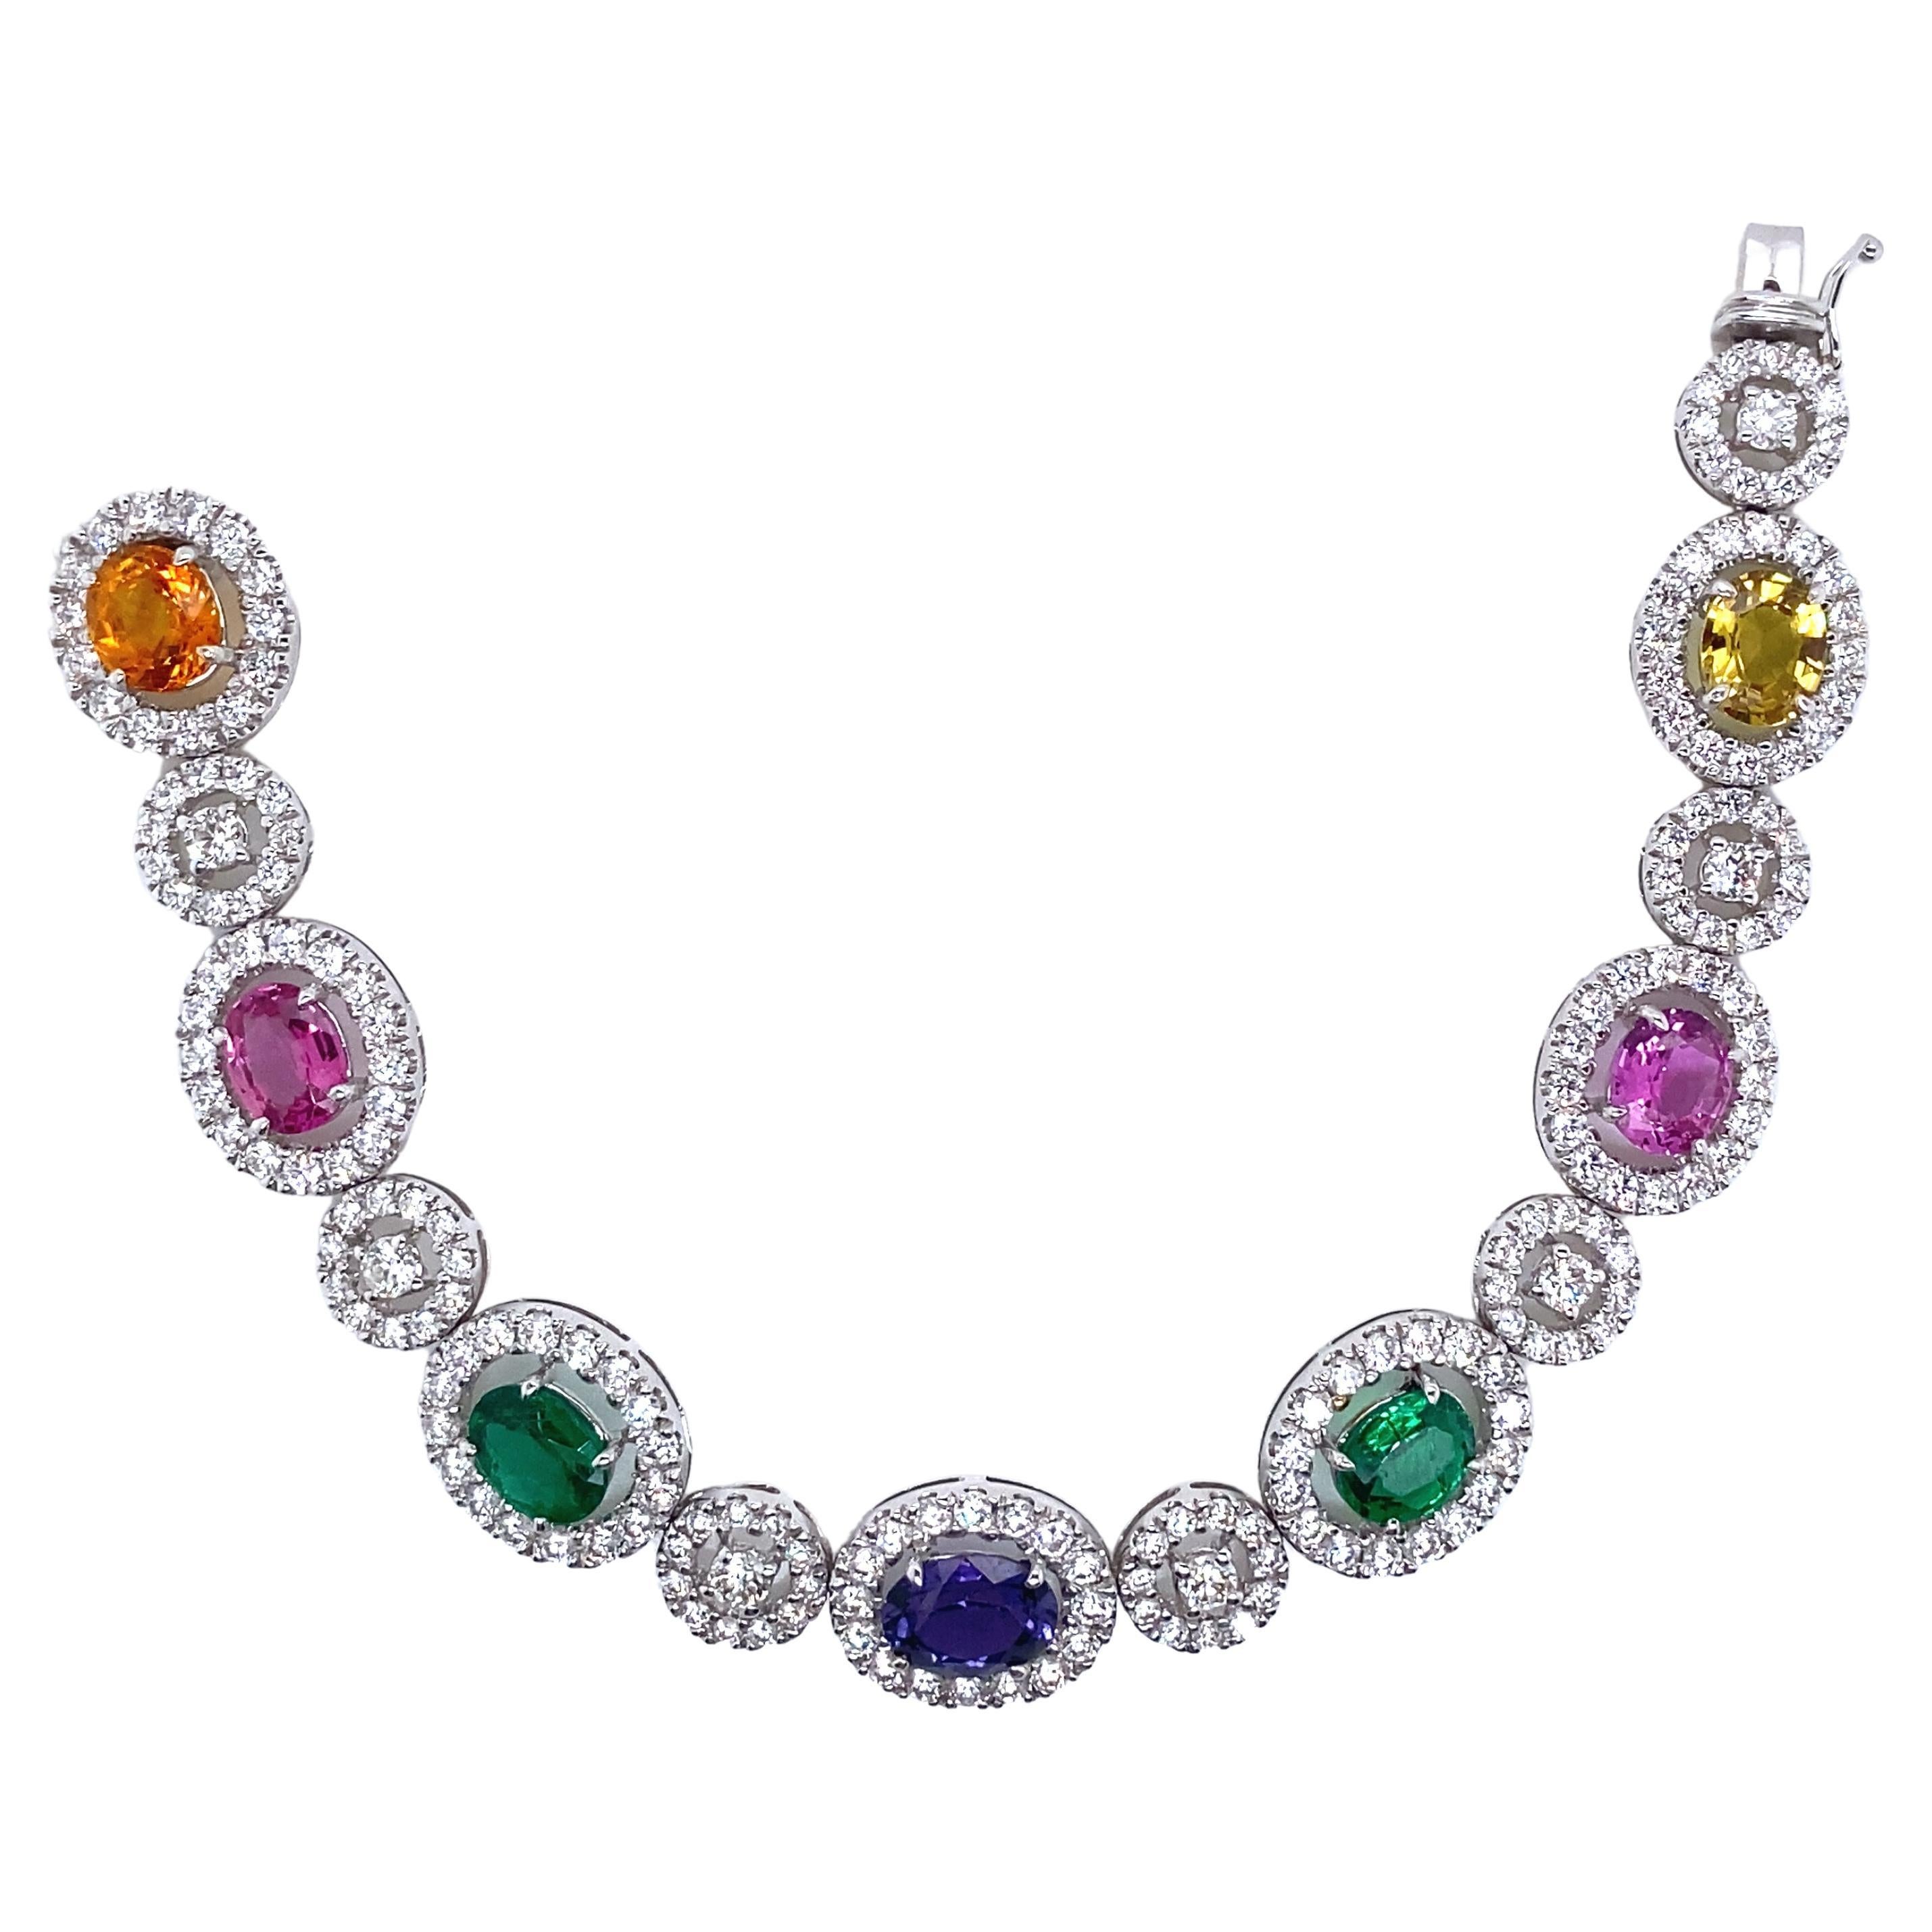 10.41 Carat GRS Certified No Heat Sapphire, Emerald, and Diamond Gold Bracelet:

All stones are GRS certified... 

A colourful bracelet, it features natural oval-cut sapphires and emeralds weighing 10.41 carat, embellished with white round